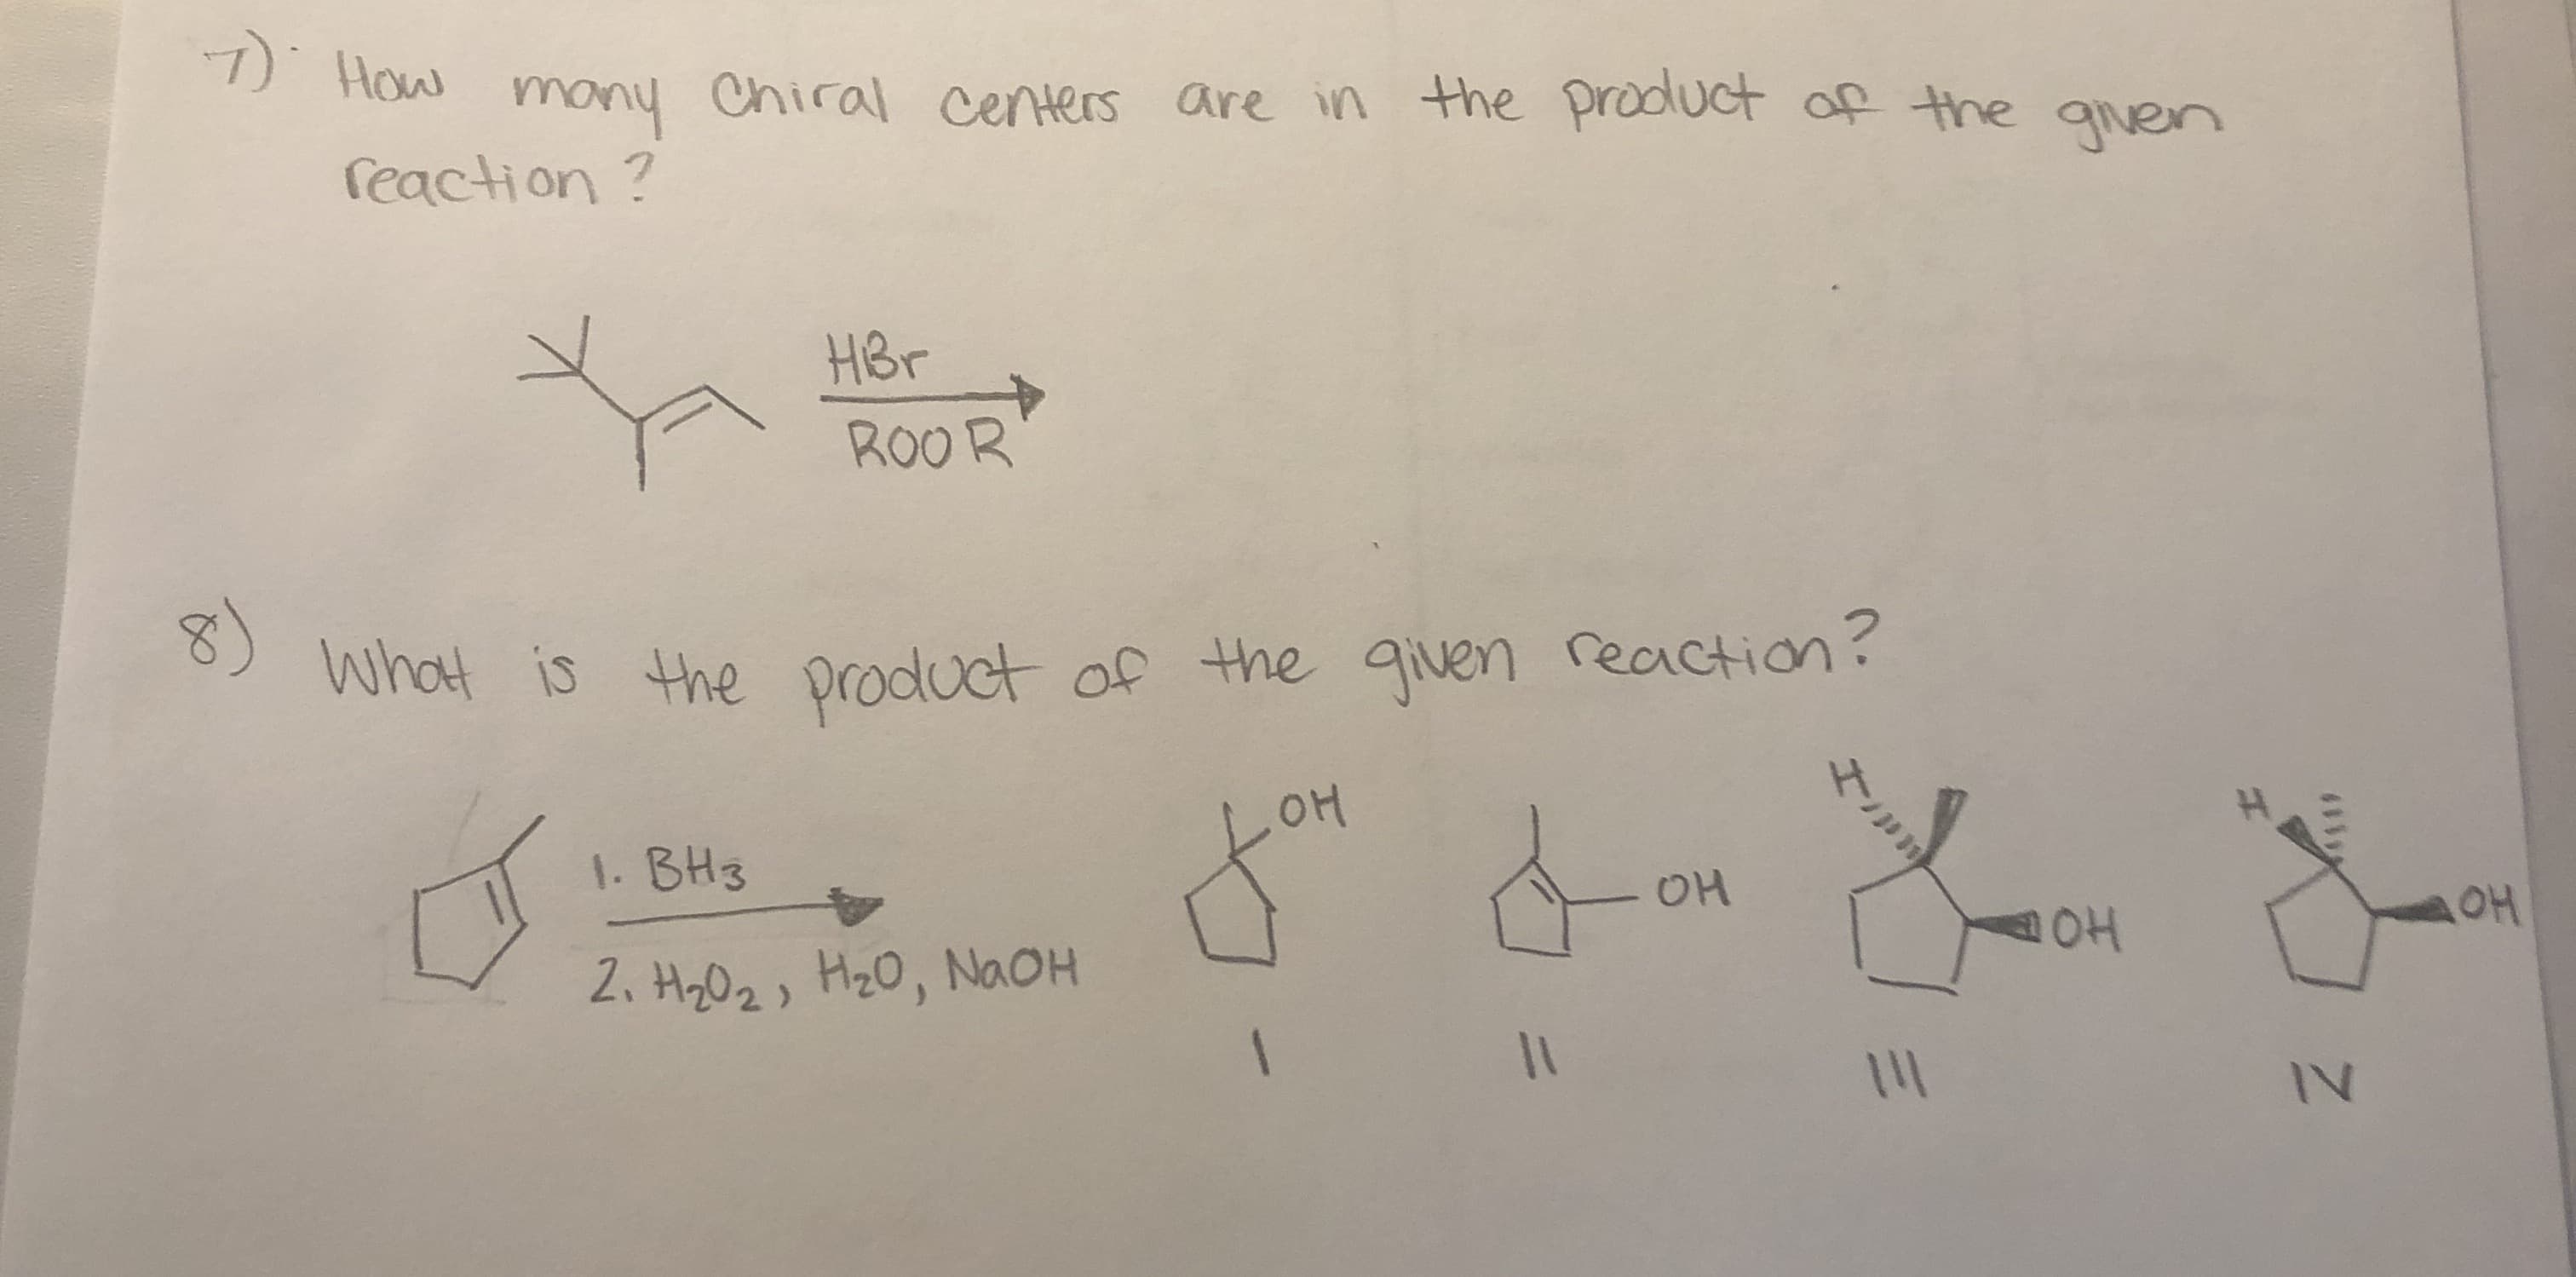 D How many Chiral centers are in the product of the quen
reaction?
HBr
ROOR
8)
What is the product of the qiven reaction?
он
1. BH3
Oн
2. HyOz, HzO, NGOH
HOH
こニ
